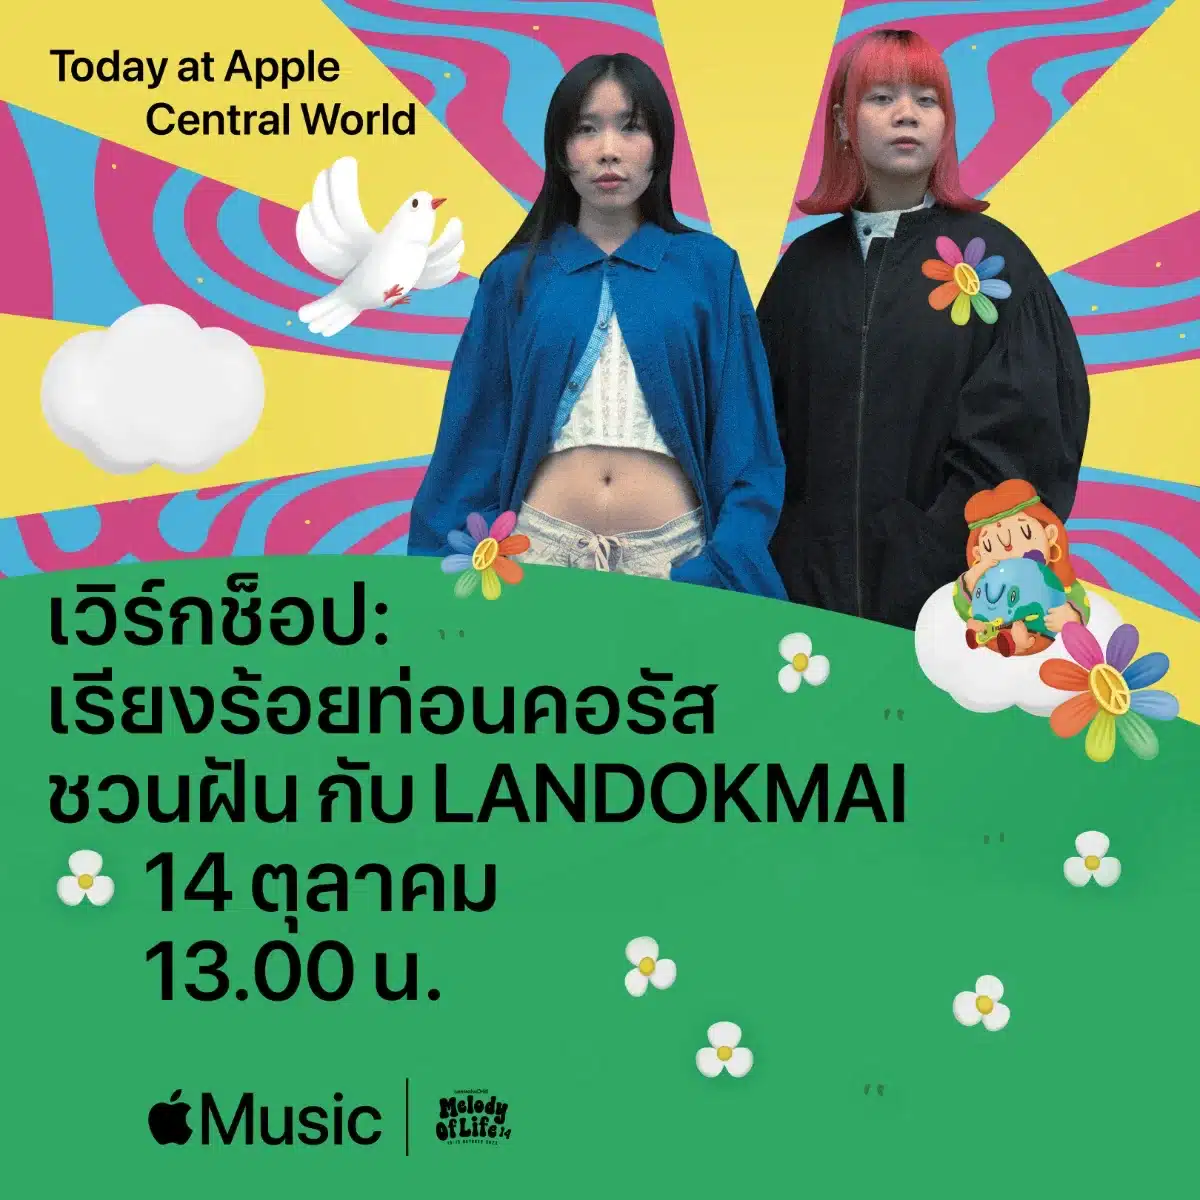 Apple Central World Apple Music Melody of Life